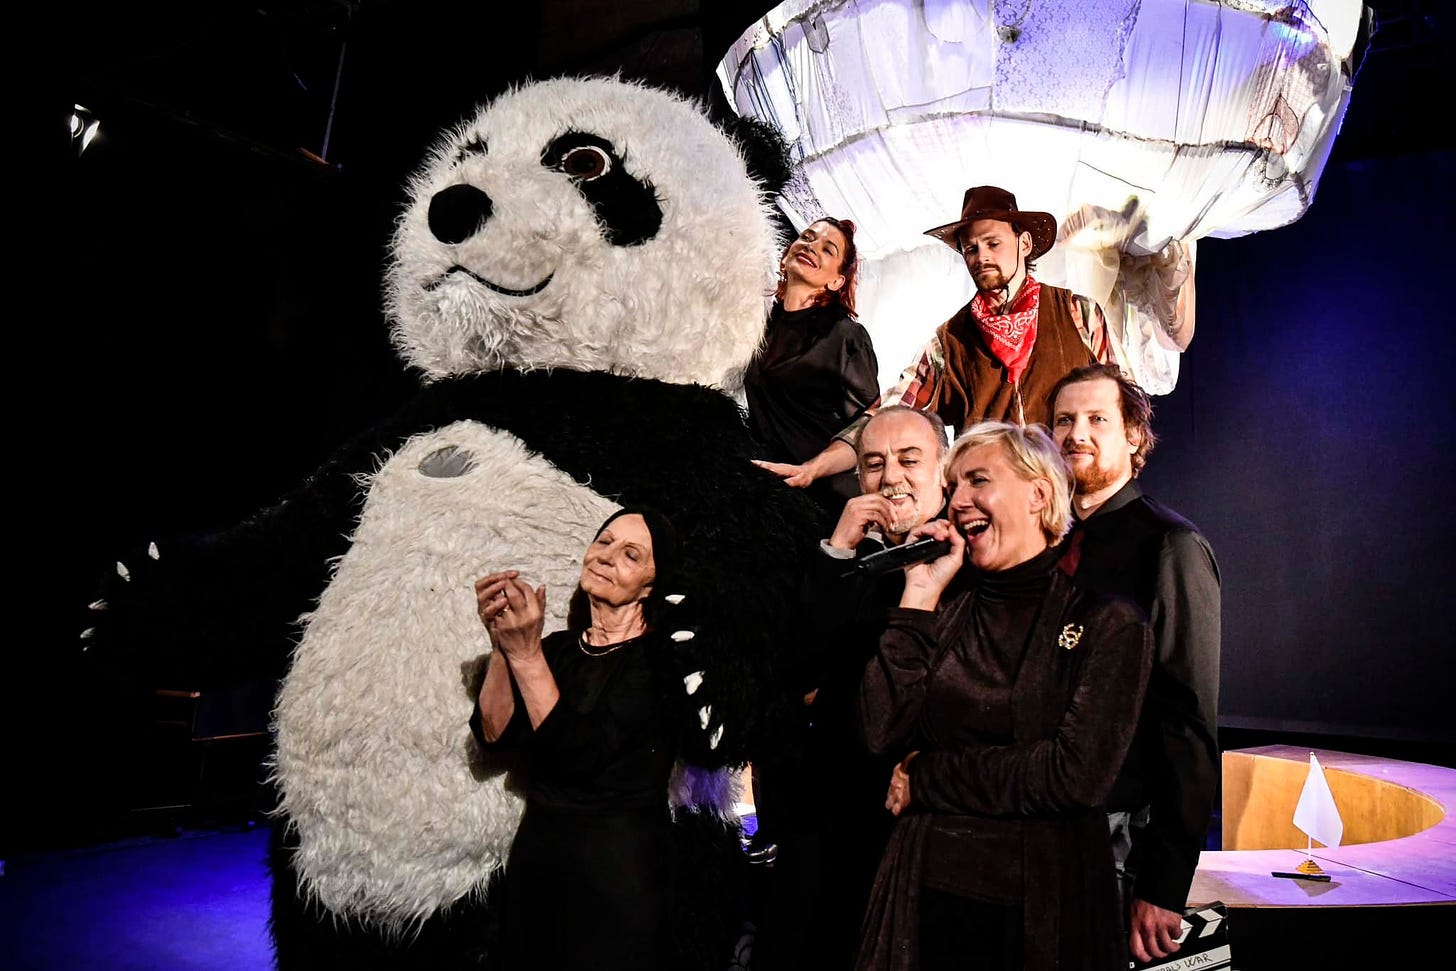 Scene from Negotiating Peace - a group of people sing and dance next to a giant panda.